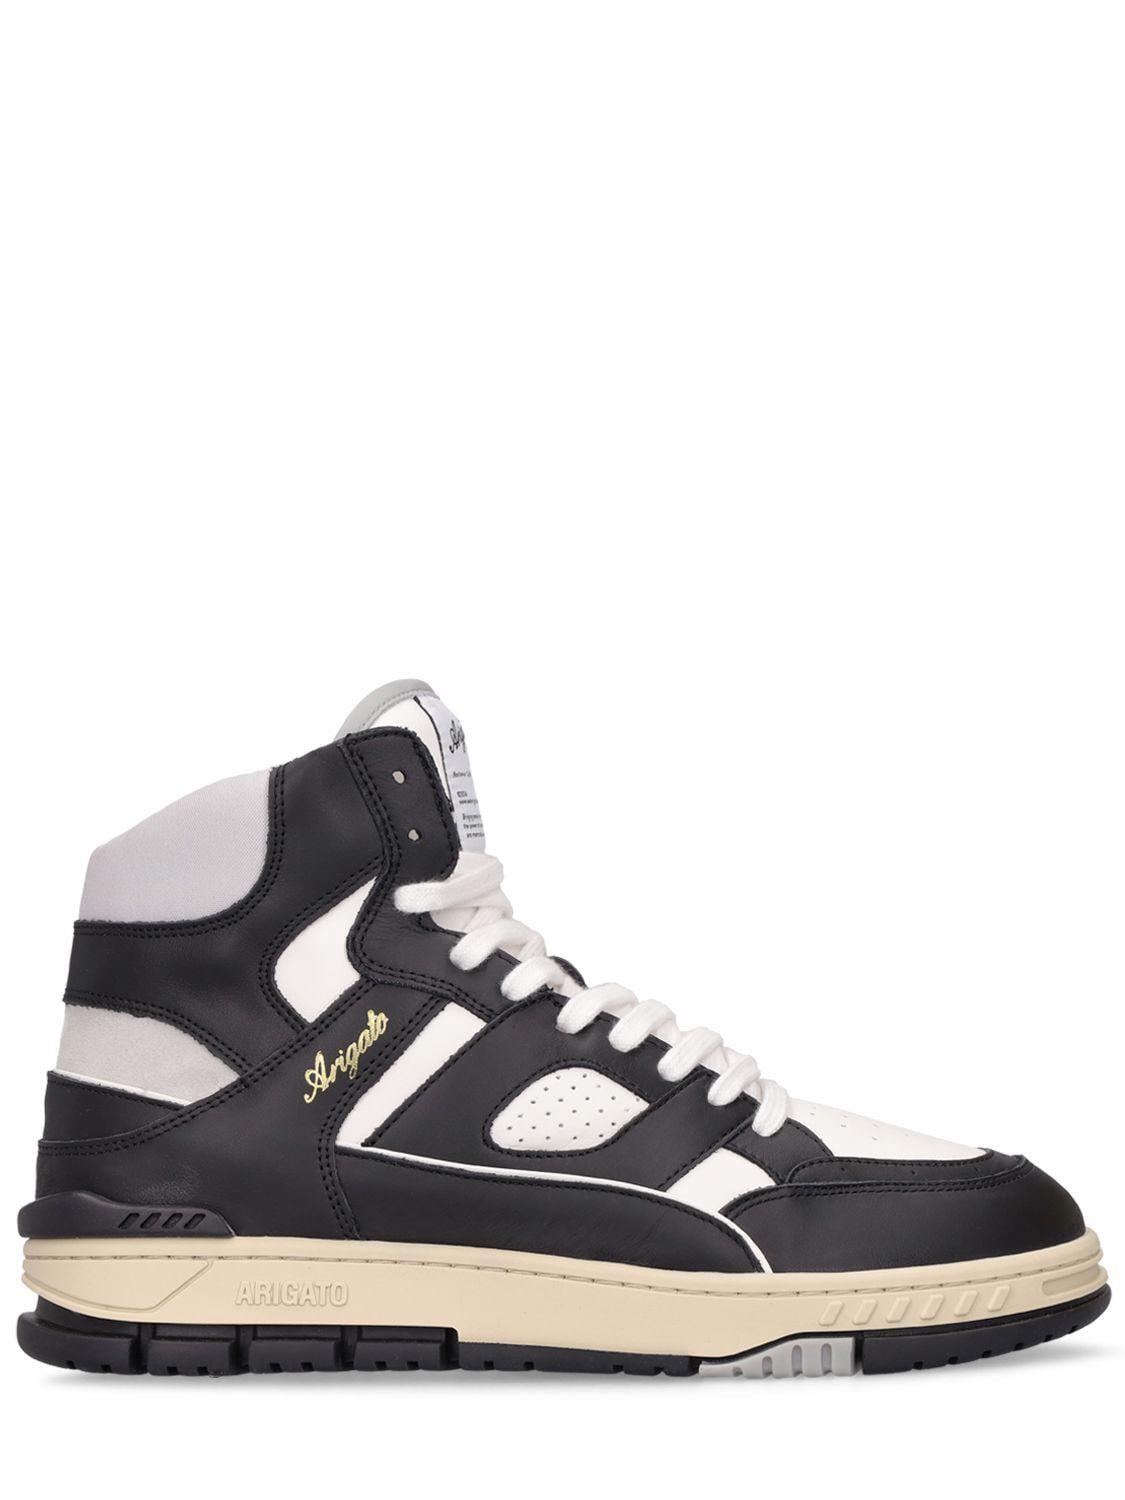 Axel Arigato Area Hi Leather Sneakers in Black for Men | Lyst